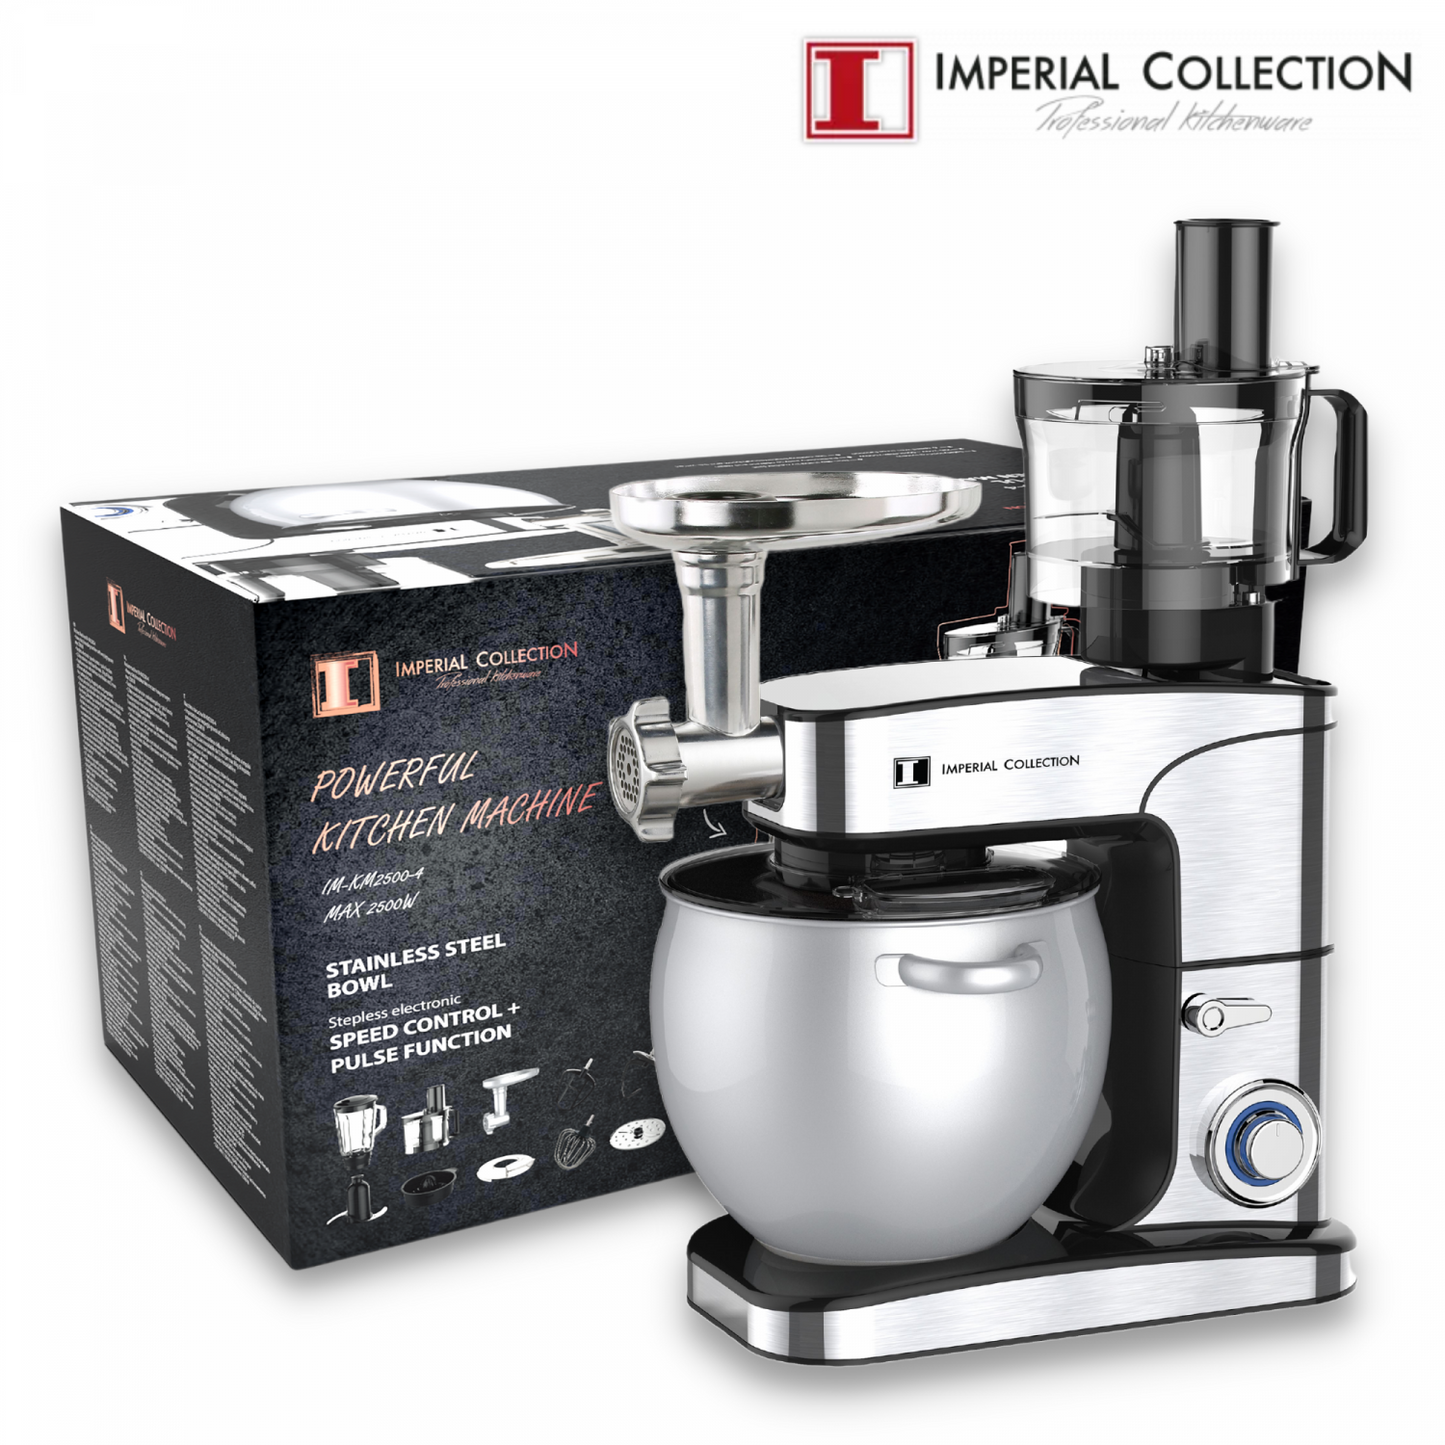 Imperial Collection Multifunctional Stand Mixer, Meat Grinder, and Citrus Juicer